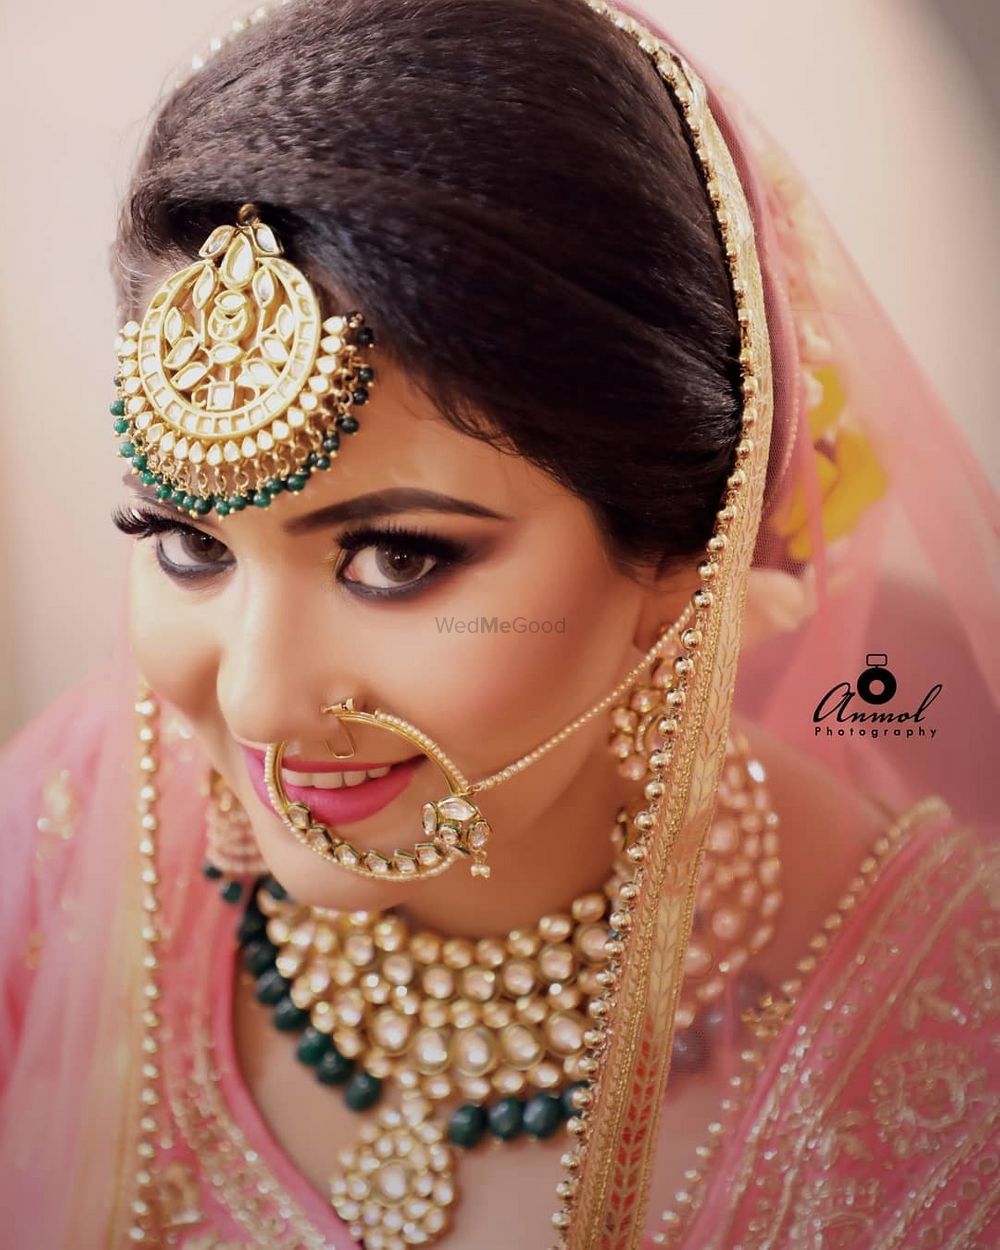 Photo By Anmol Photography - Photographers